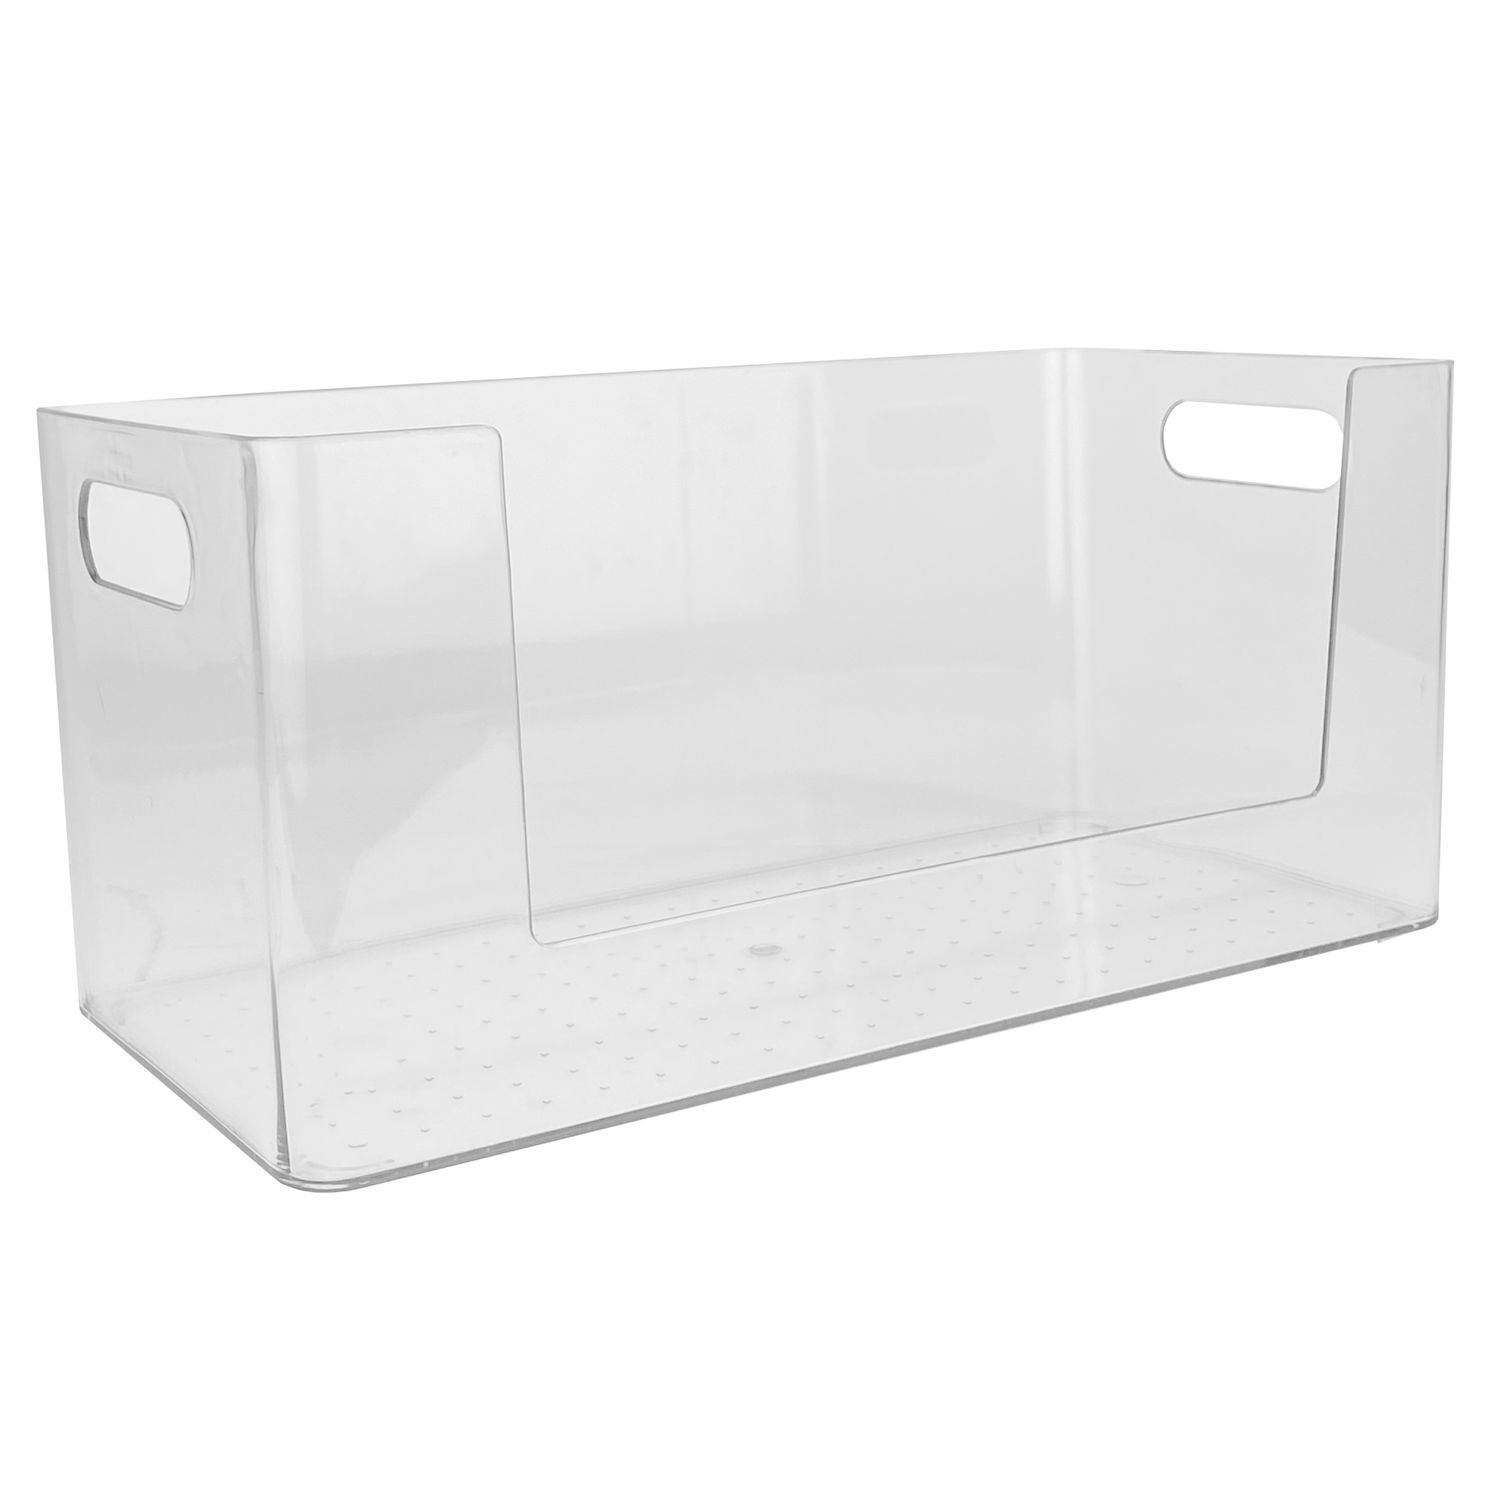 Juvale acrylic display case with 5 tiers for collectibles, figures